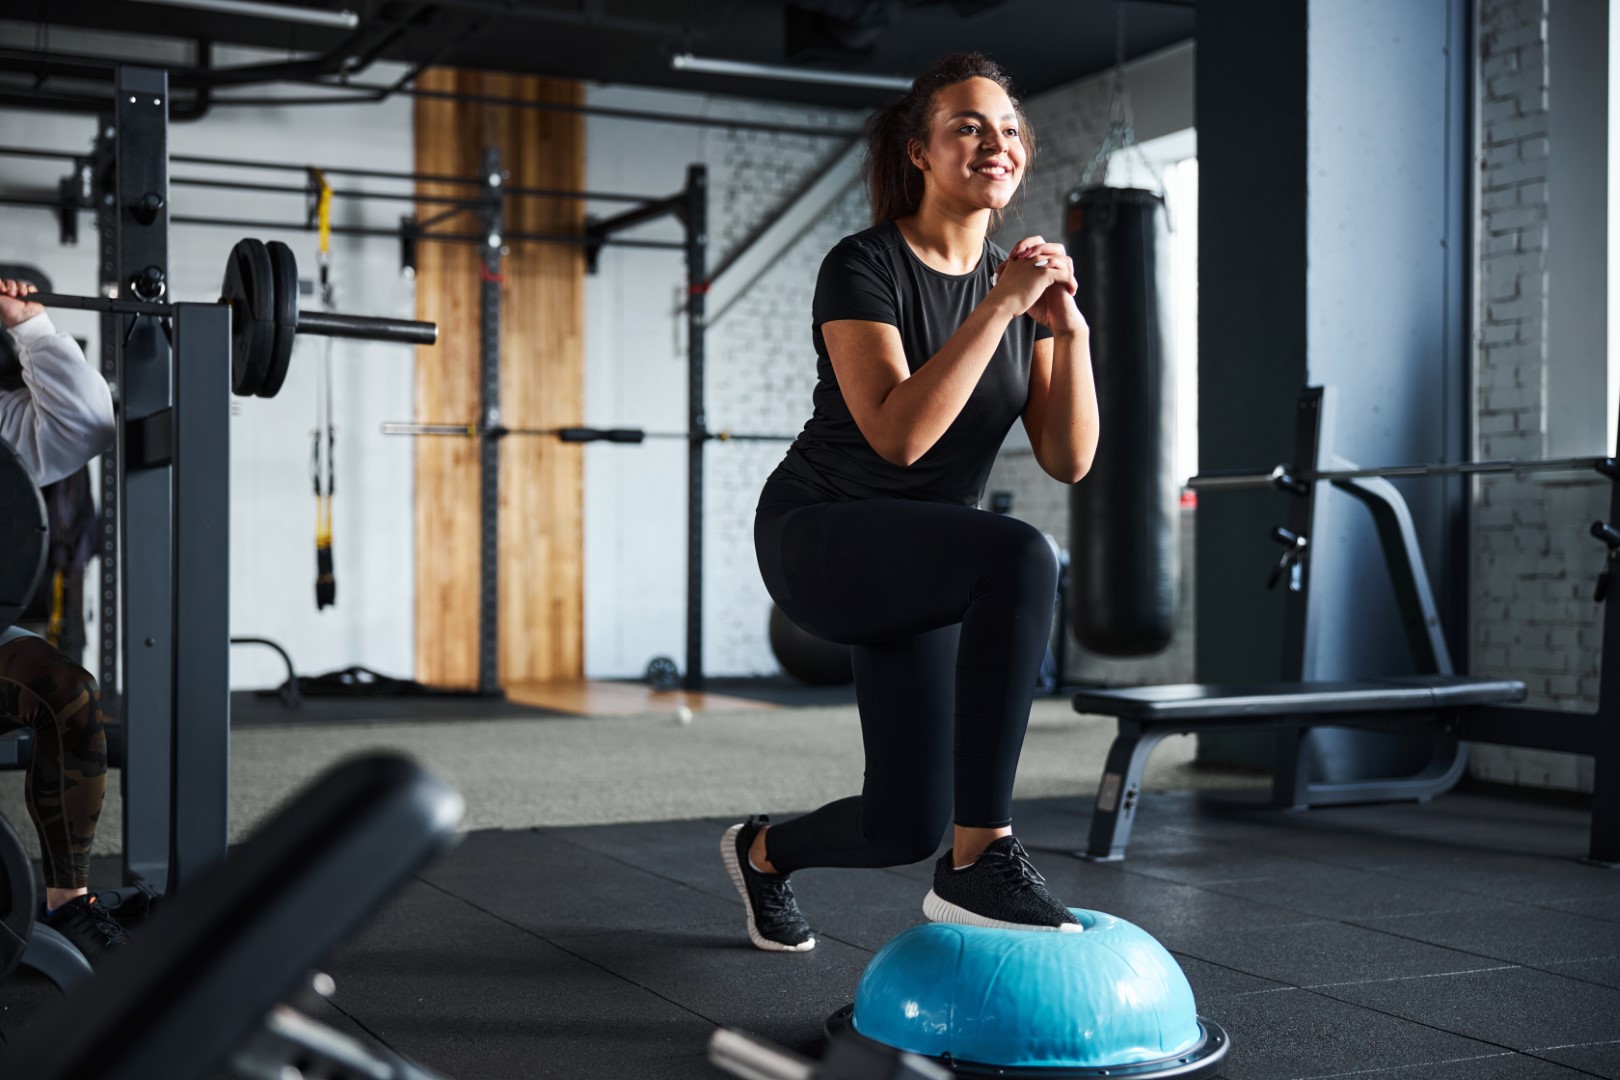 6 Low-Impact HIIT Workouts That Won't Hurt Your Back, Knees or